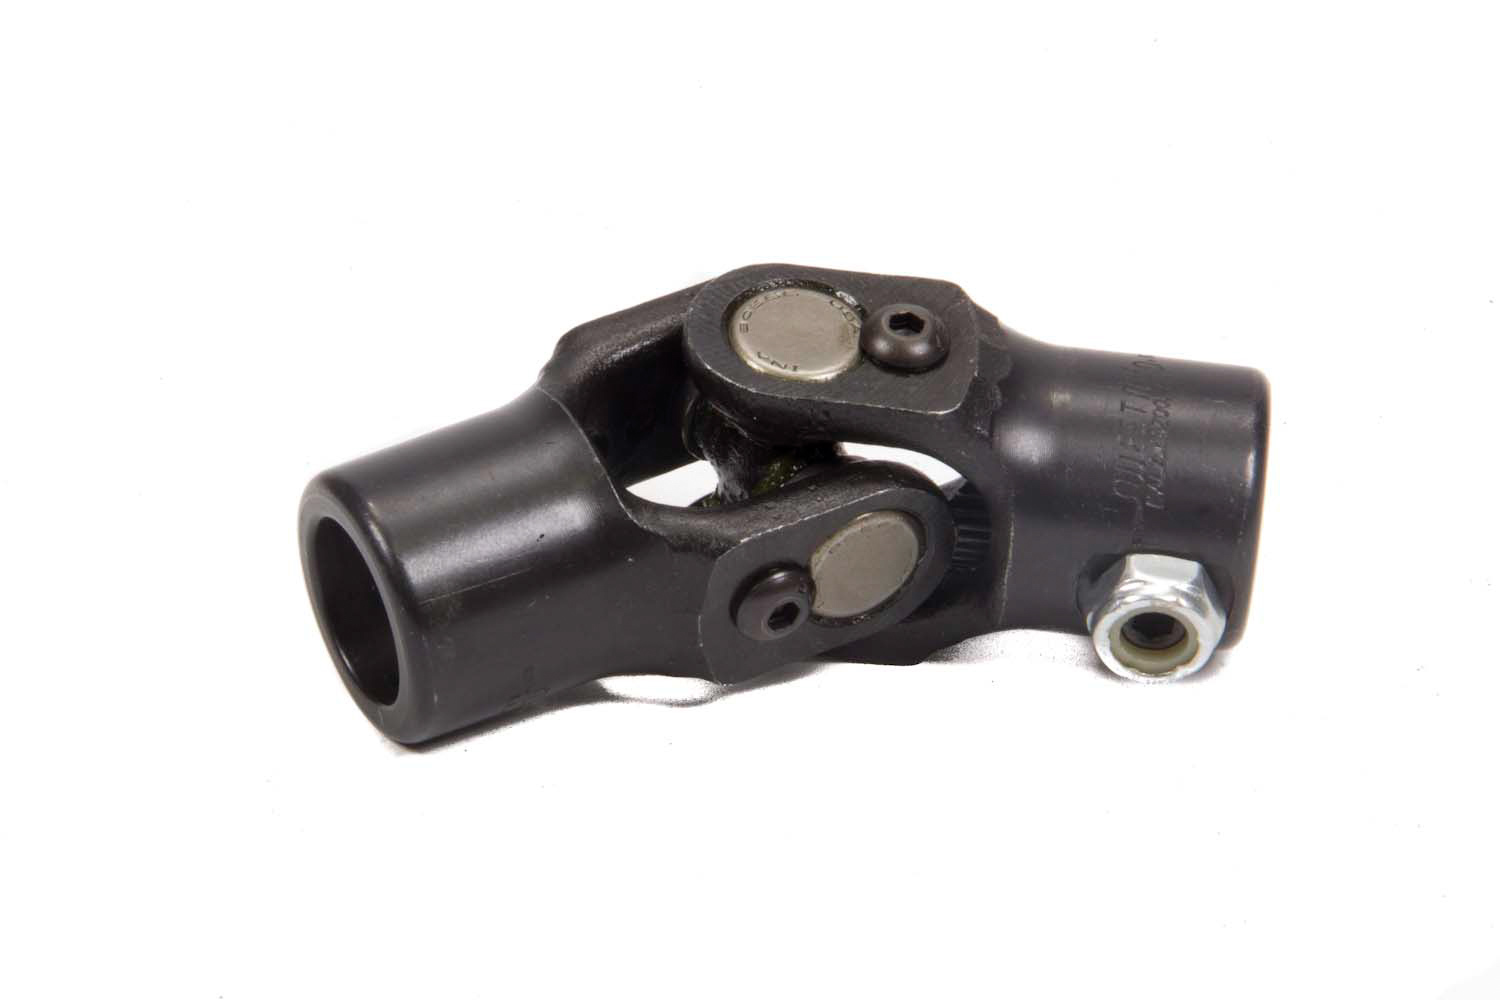 Steering Universal Joint - Single Joint - 3/4 in Smooth Bore to Corvette Bottom Set Screw - Steel - Black Paint - Each